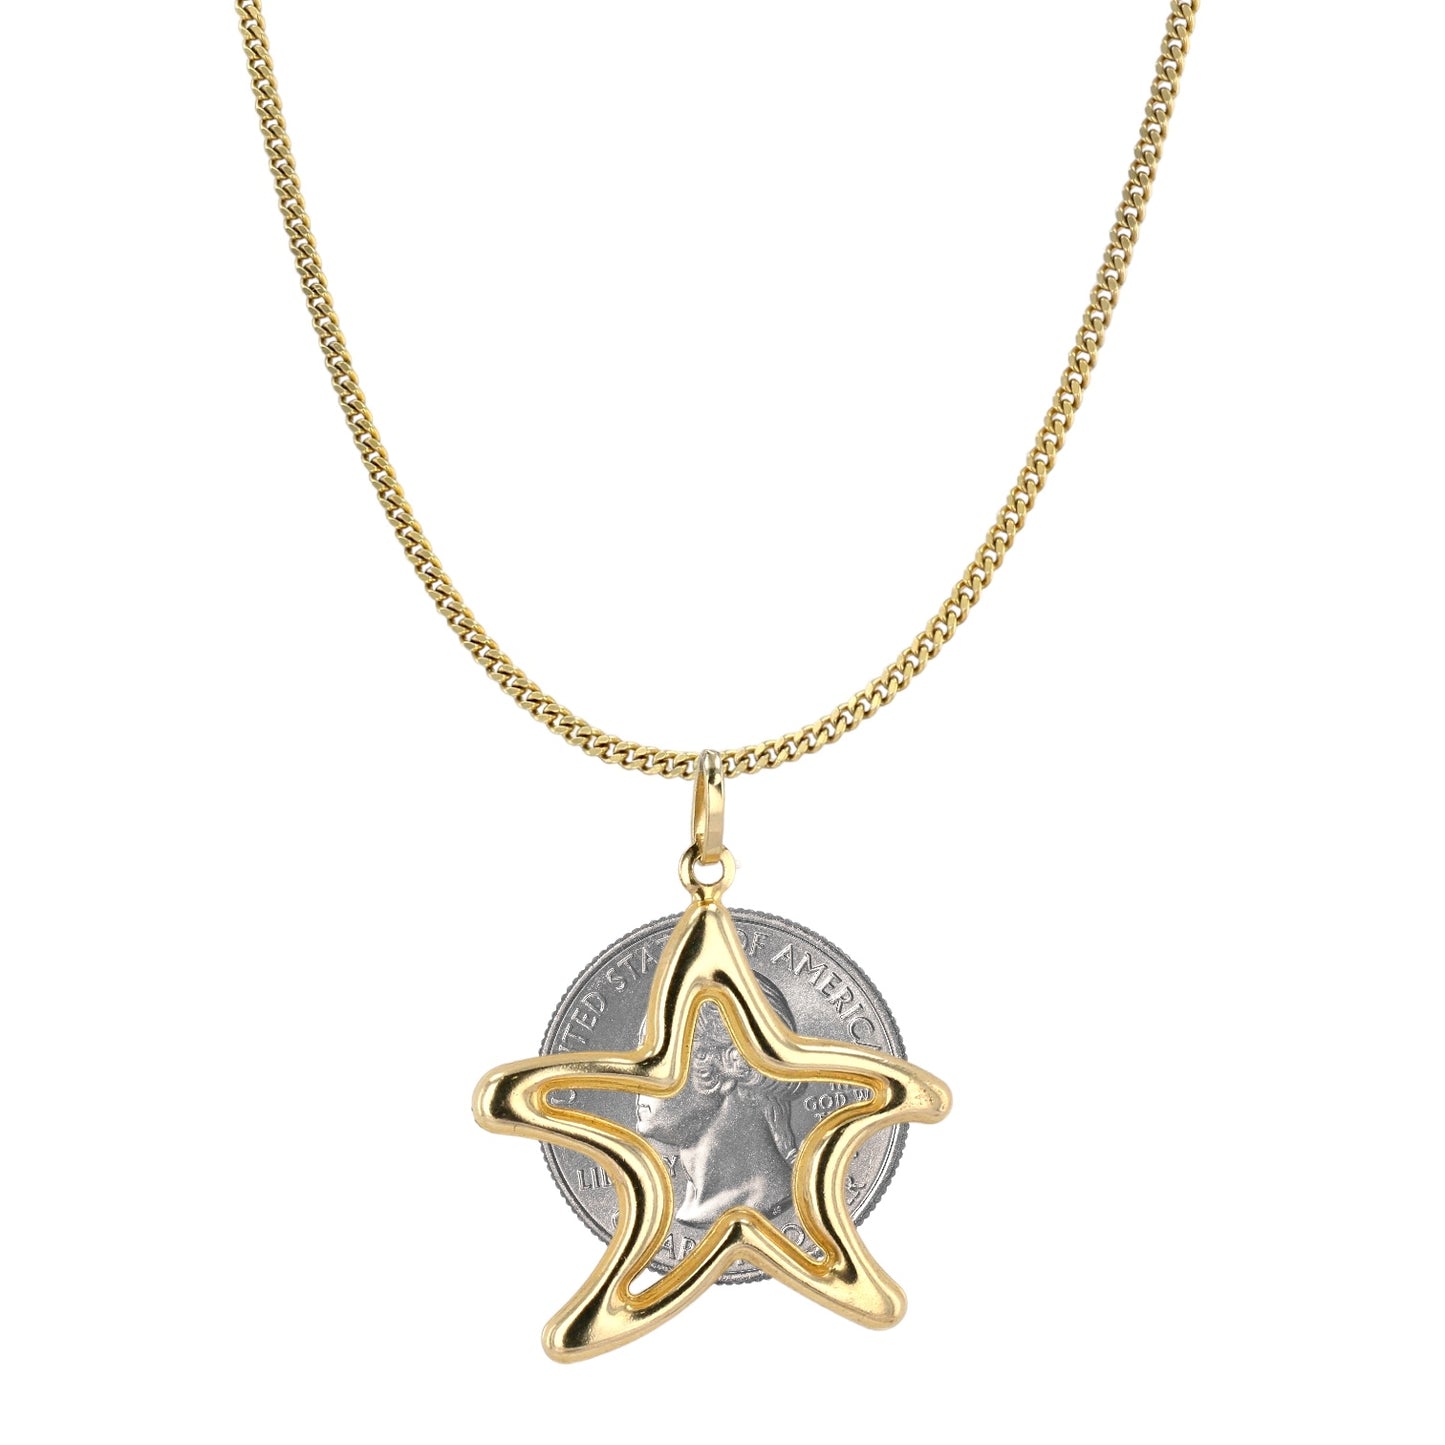 10k yellow gold Star necklace-50026